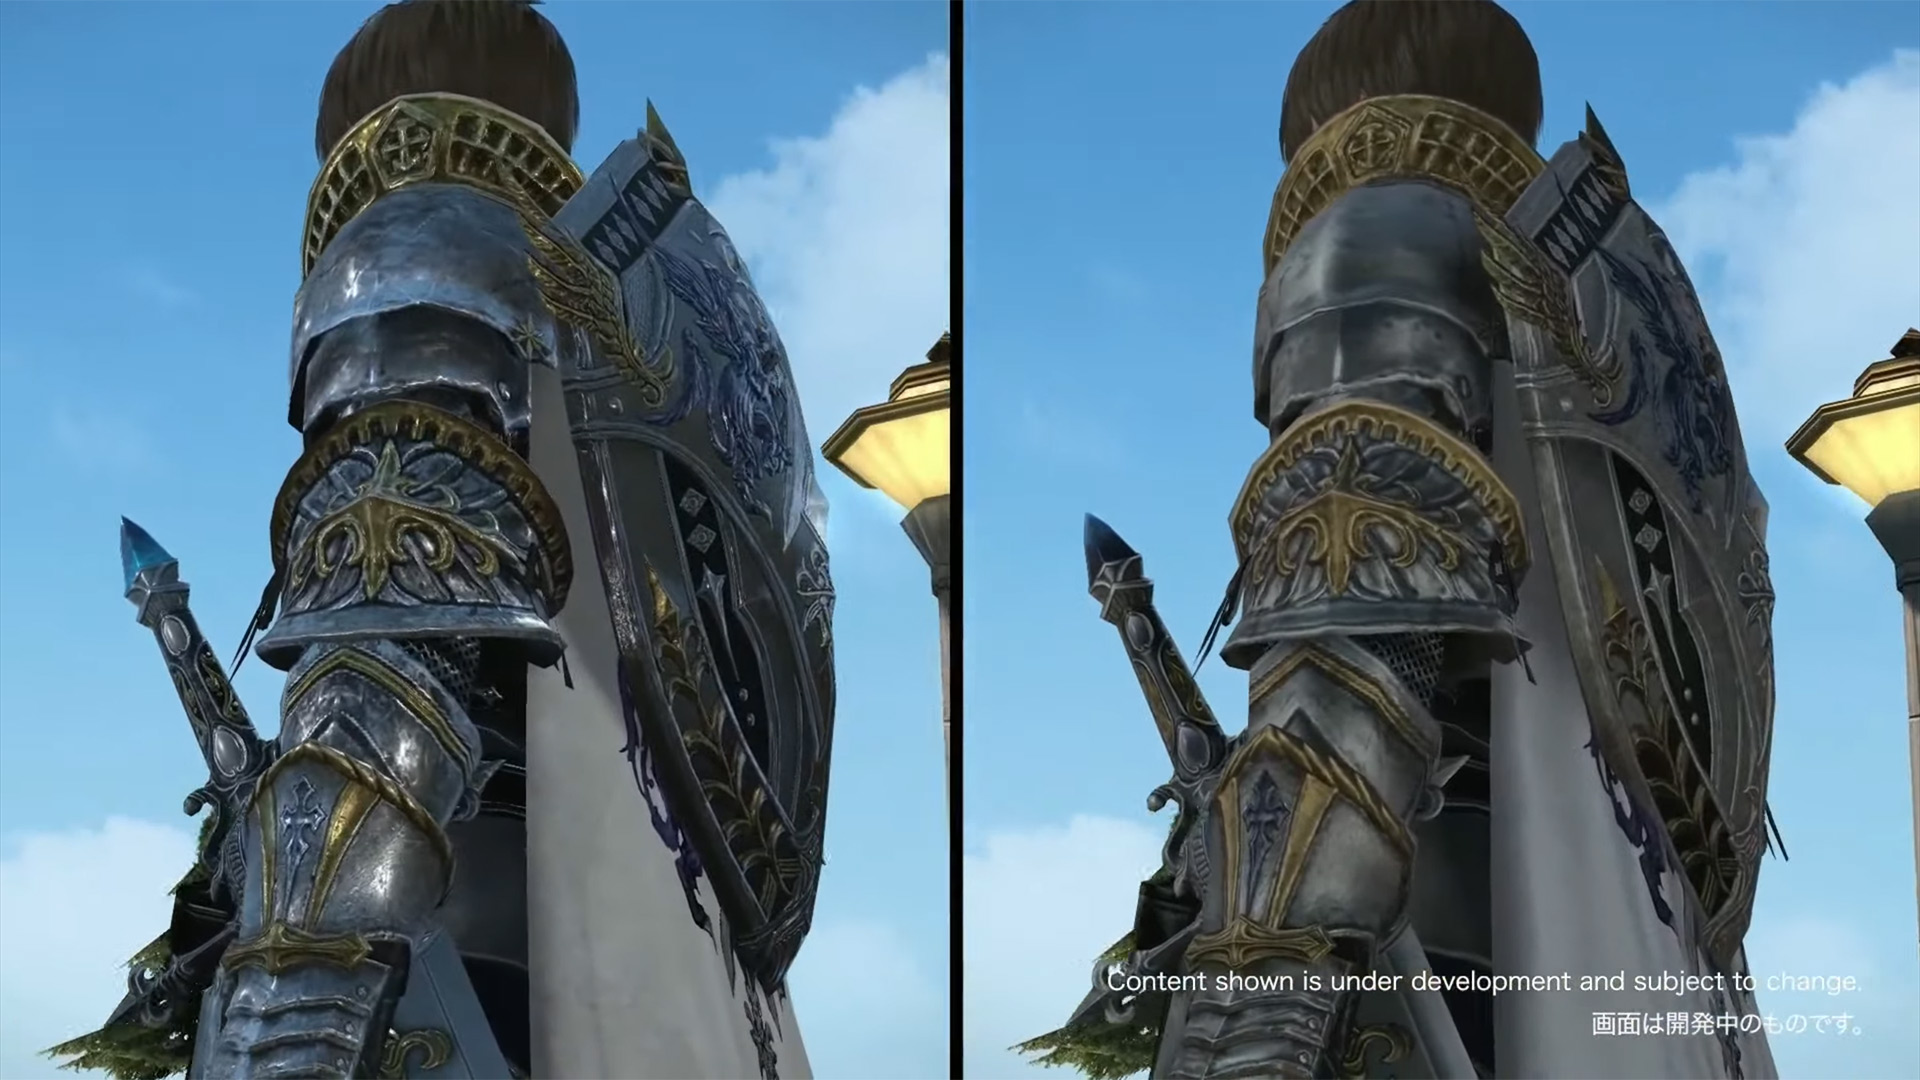 Final Fantasy XIV: Dawntrail will bring an update to the game's graphical system